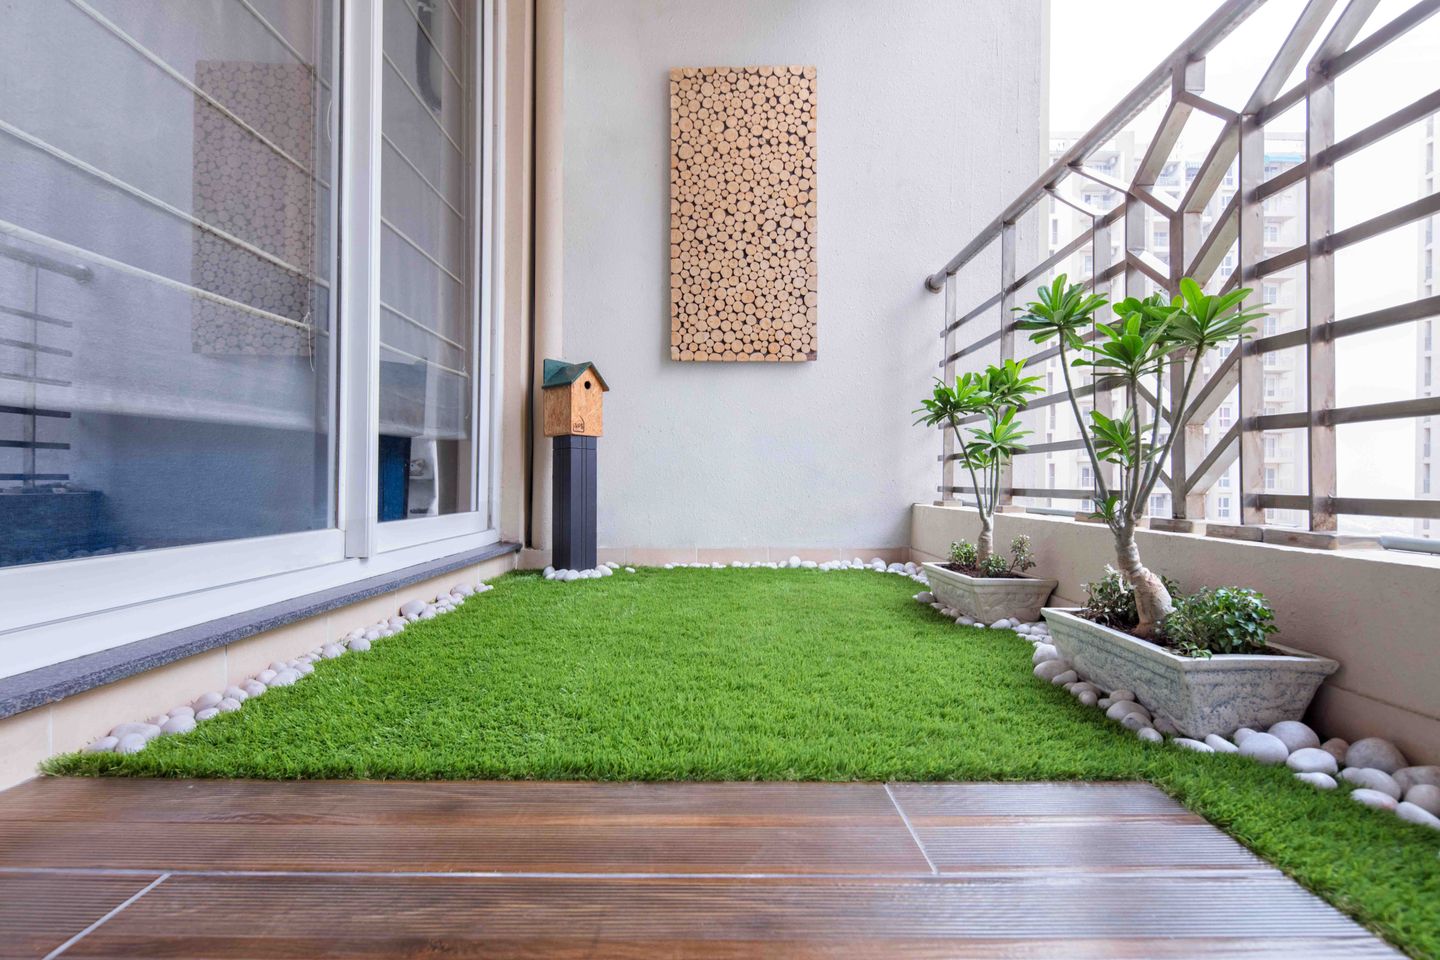 5X9 Ft Balcony Design With Turf Grass And Mural- Livspace